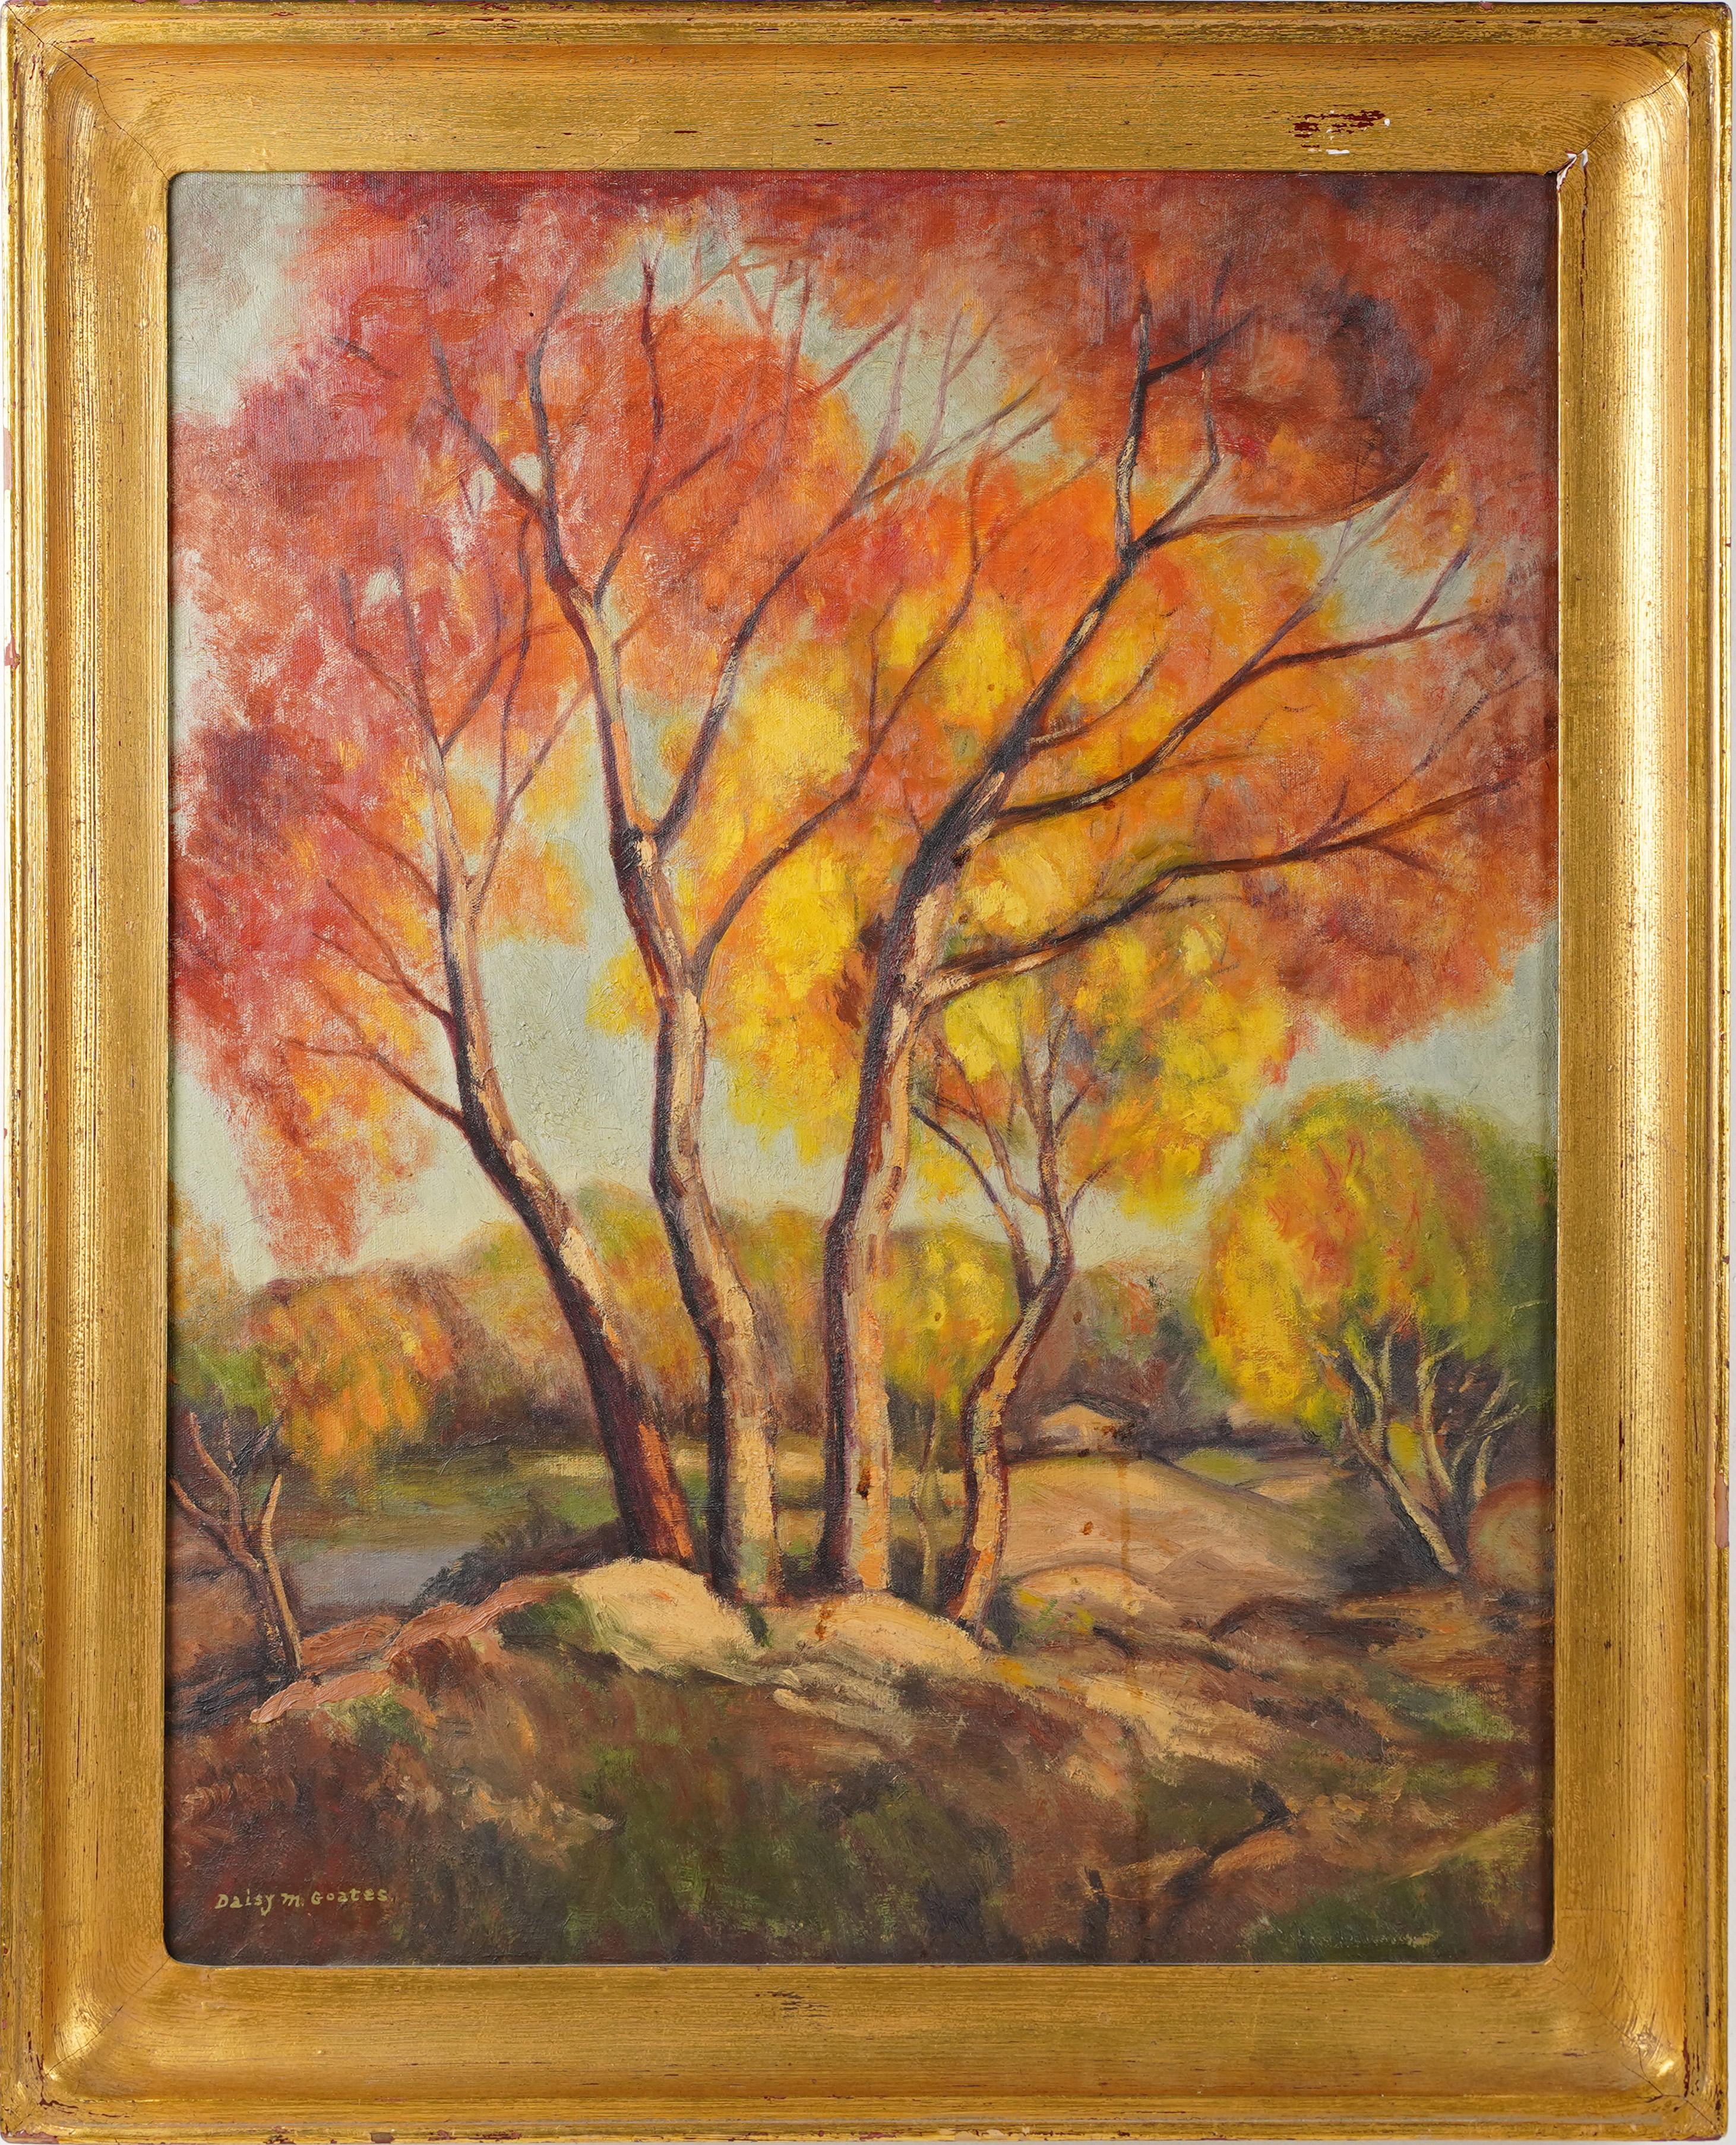 daisy goates Landscape Painting - Antique American Impressionist Fall Landscape Signed Framed Oil Painting